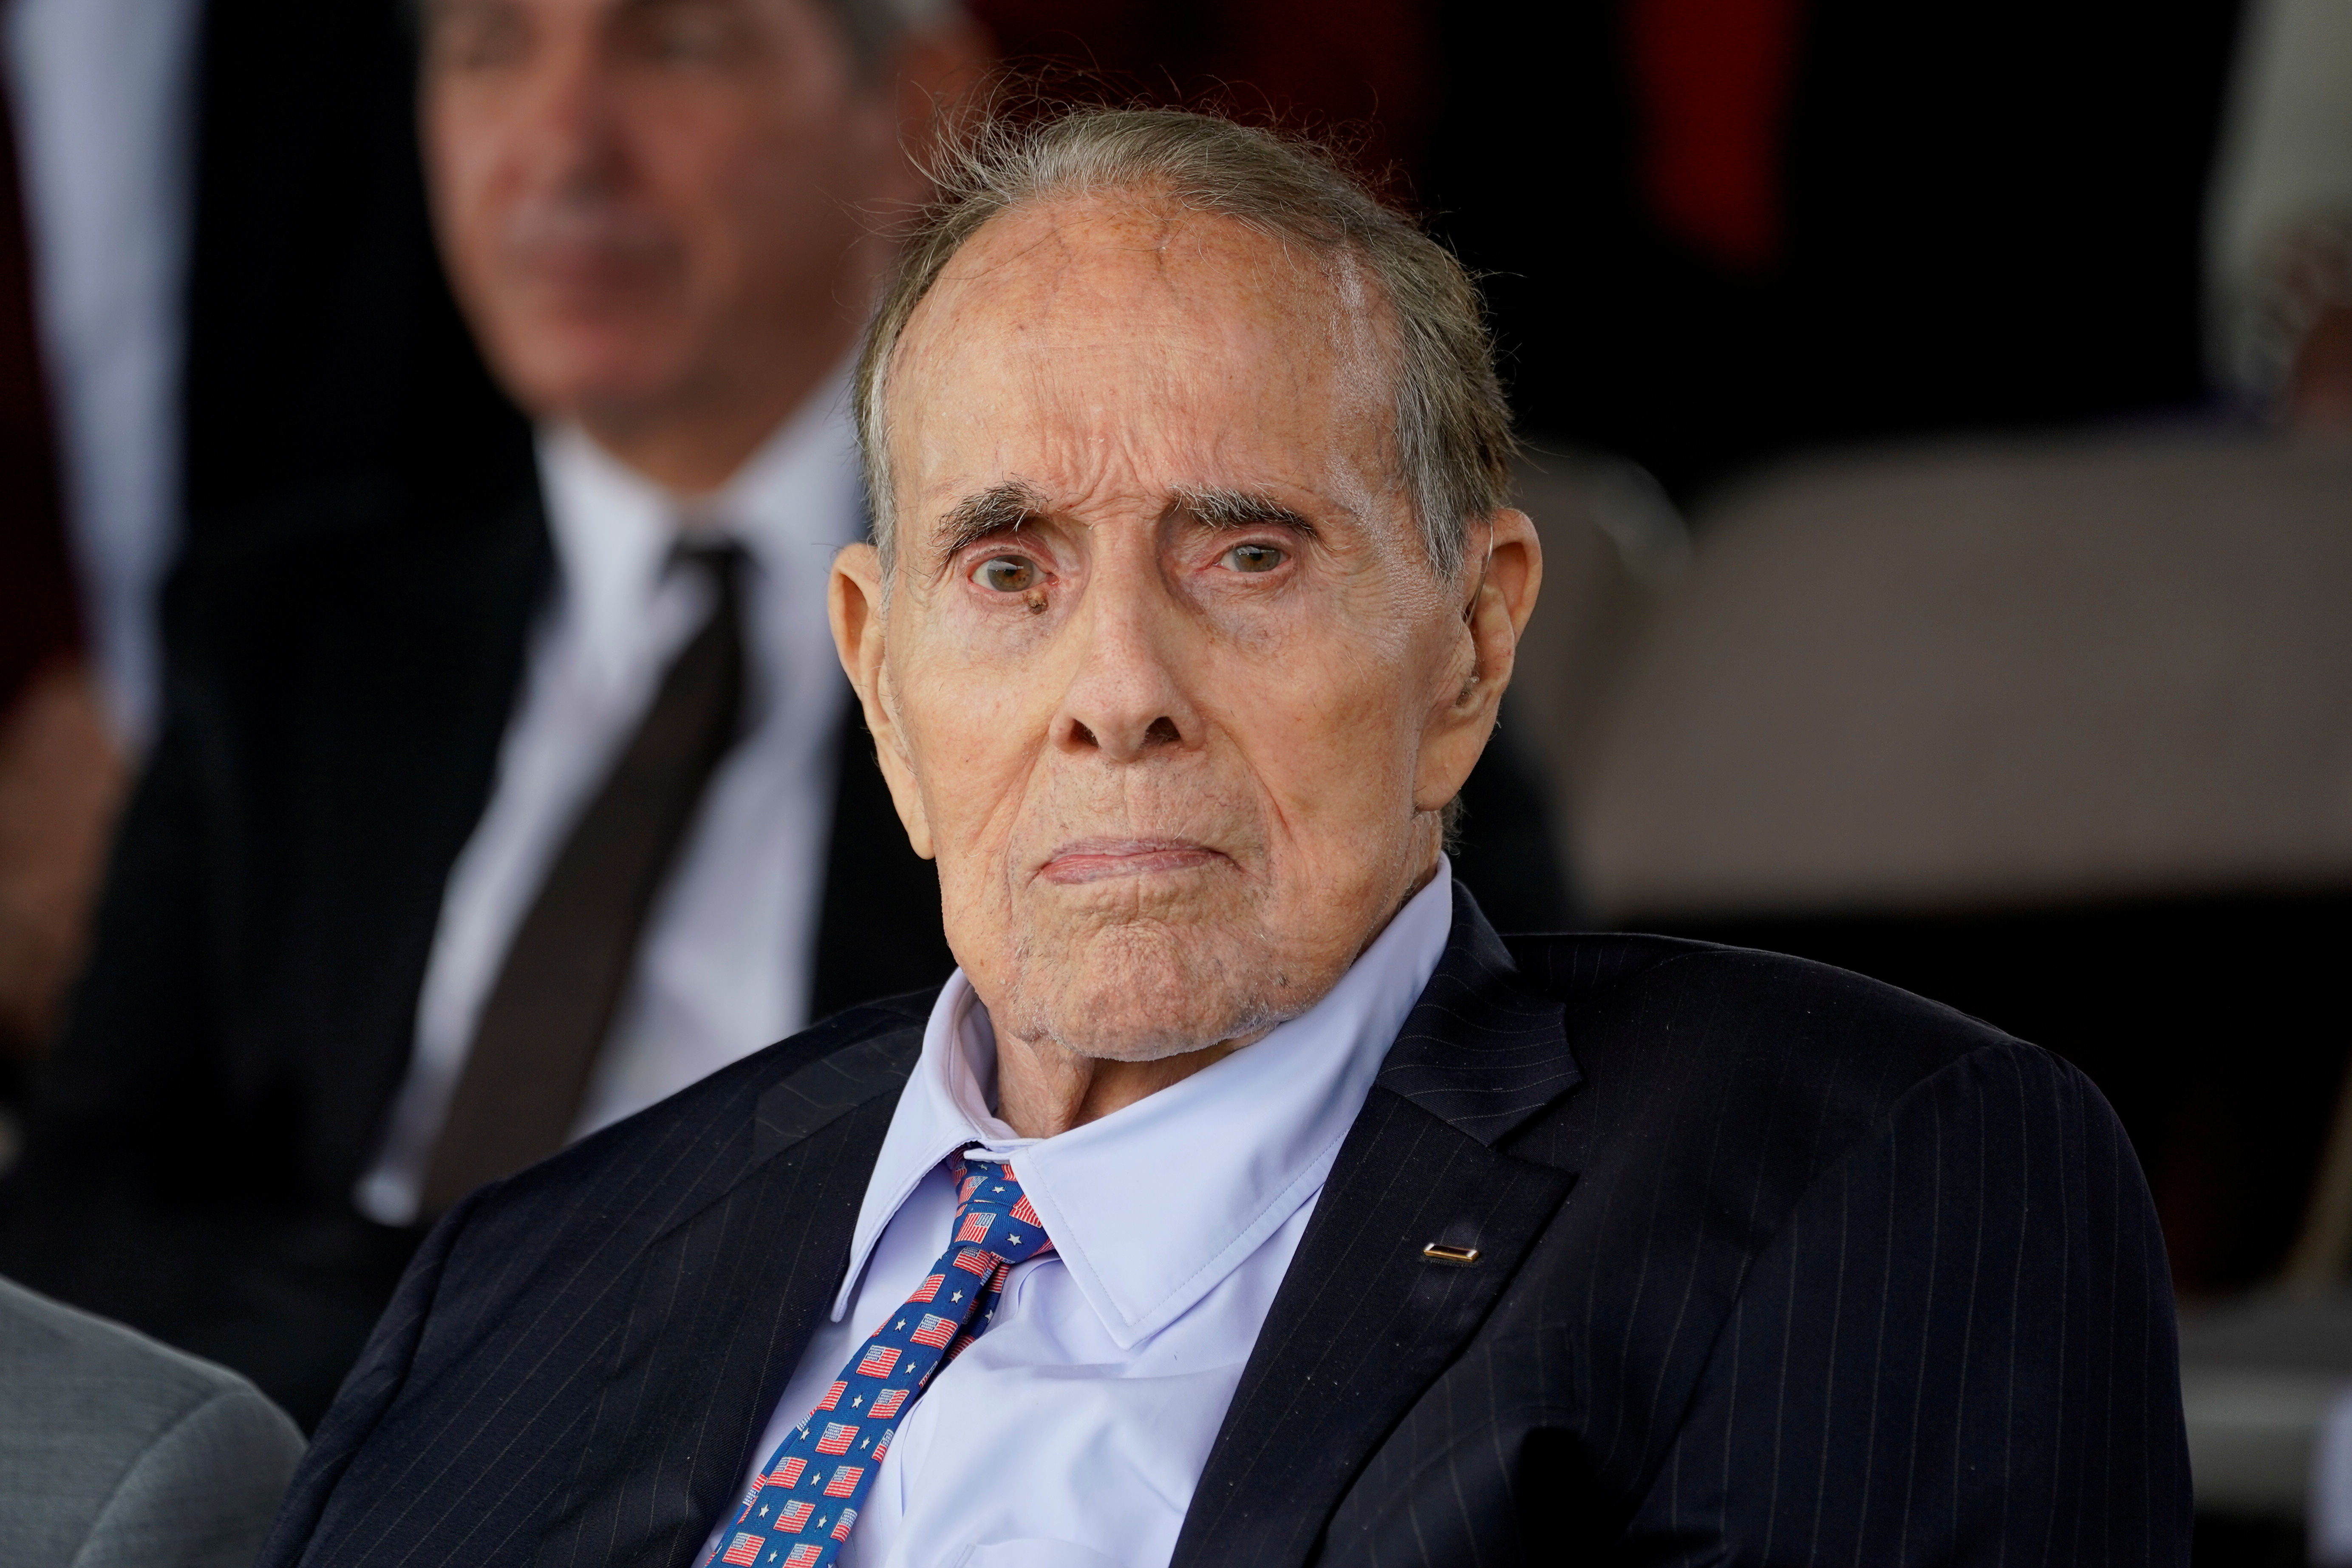 Former Senate majority leader Bob Dole (R-KS) attends a welcome ceremony in honor of new Joint Chiefs of Staff Chairman Army General Mark Milley at Joint Base Myer-Henderson Hall, Virginia, U.S., September 30, 2019. REUTERS/Kevin Lamarque/File Photo